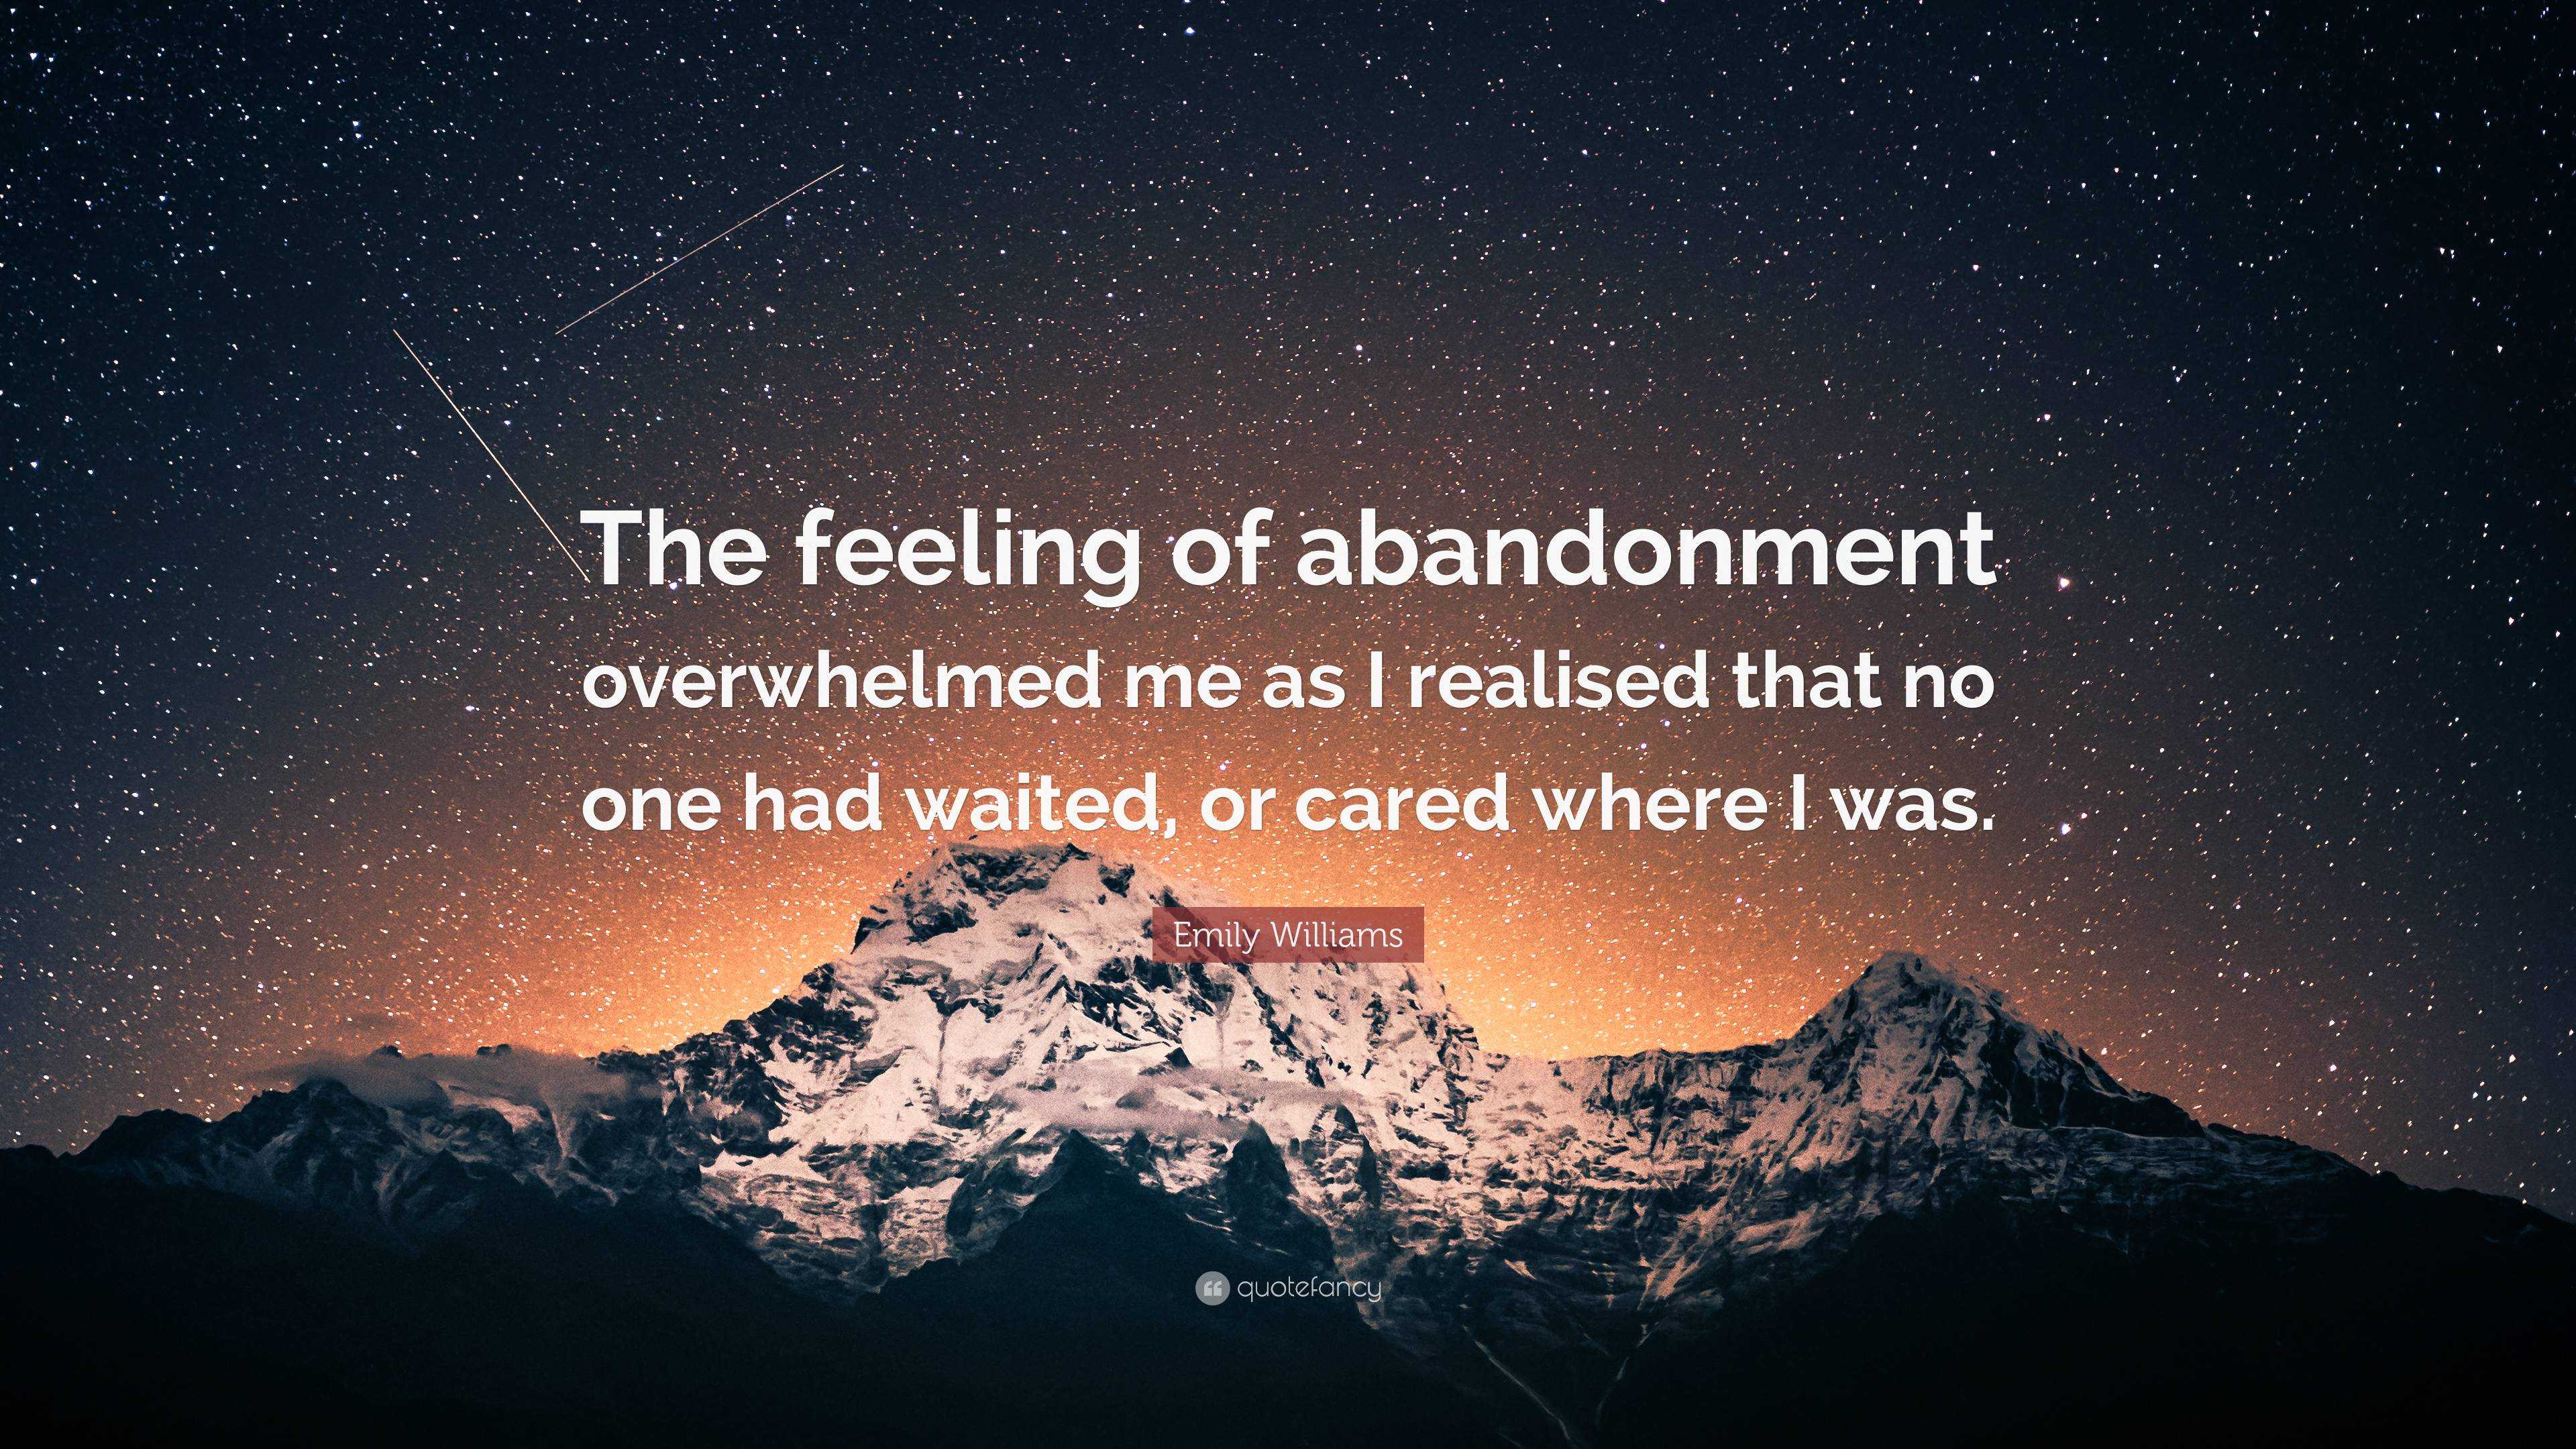 Emily Williams Quote: “The feeling of abandonment overwhelmed me